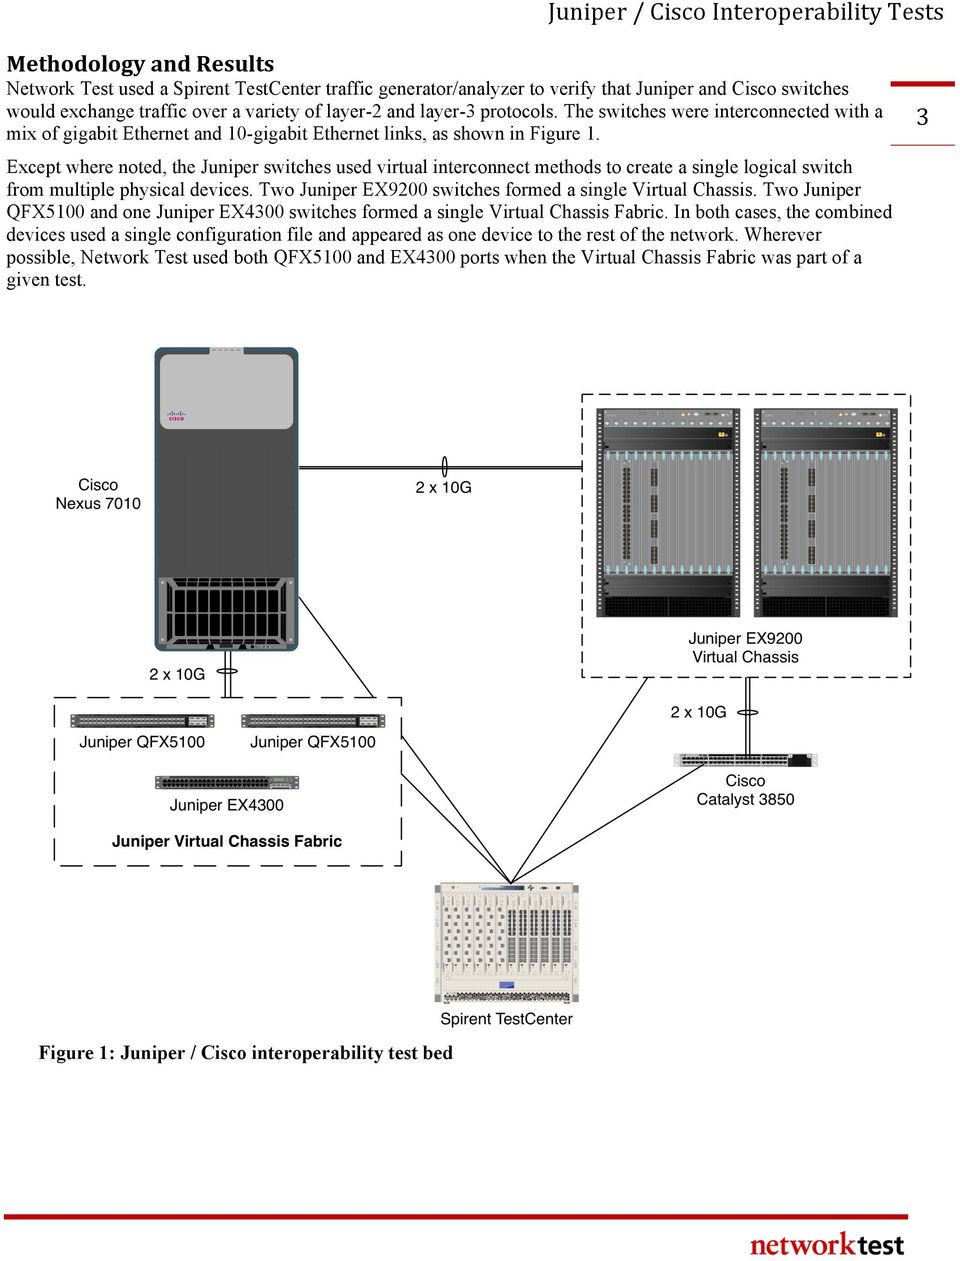 Except where noted, the Juniper switches used virtual interconnect methods to create a single logical switch from multiple physical devices.